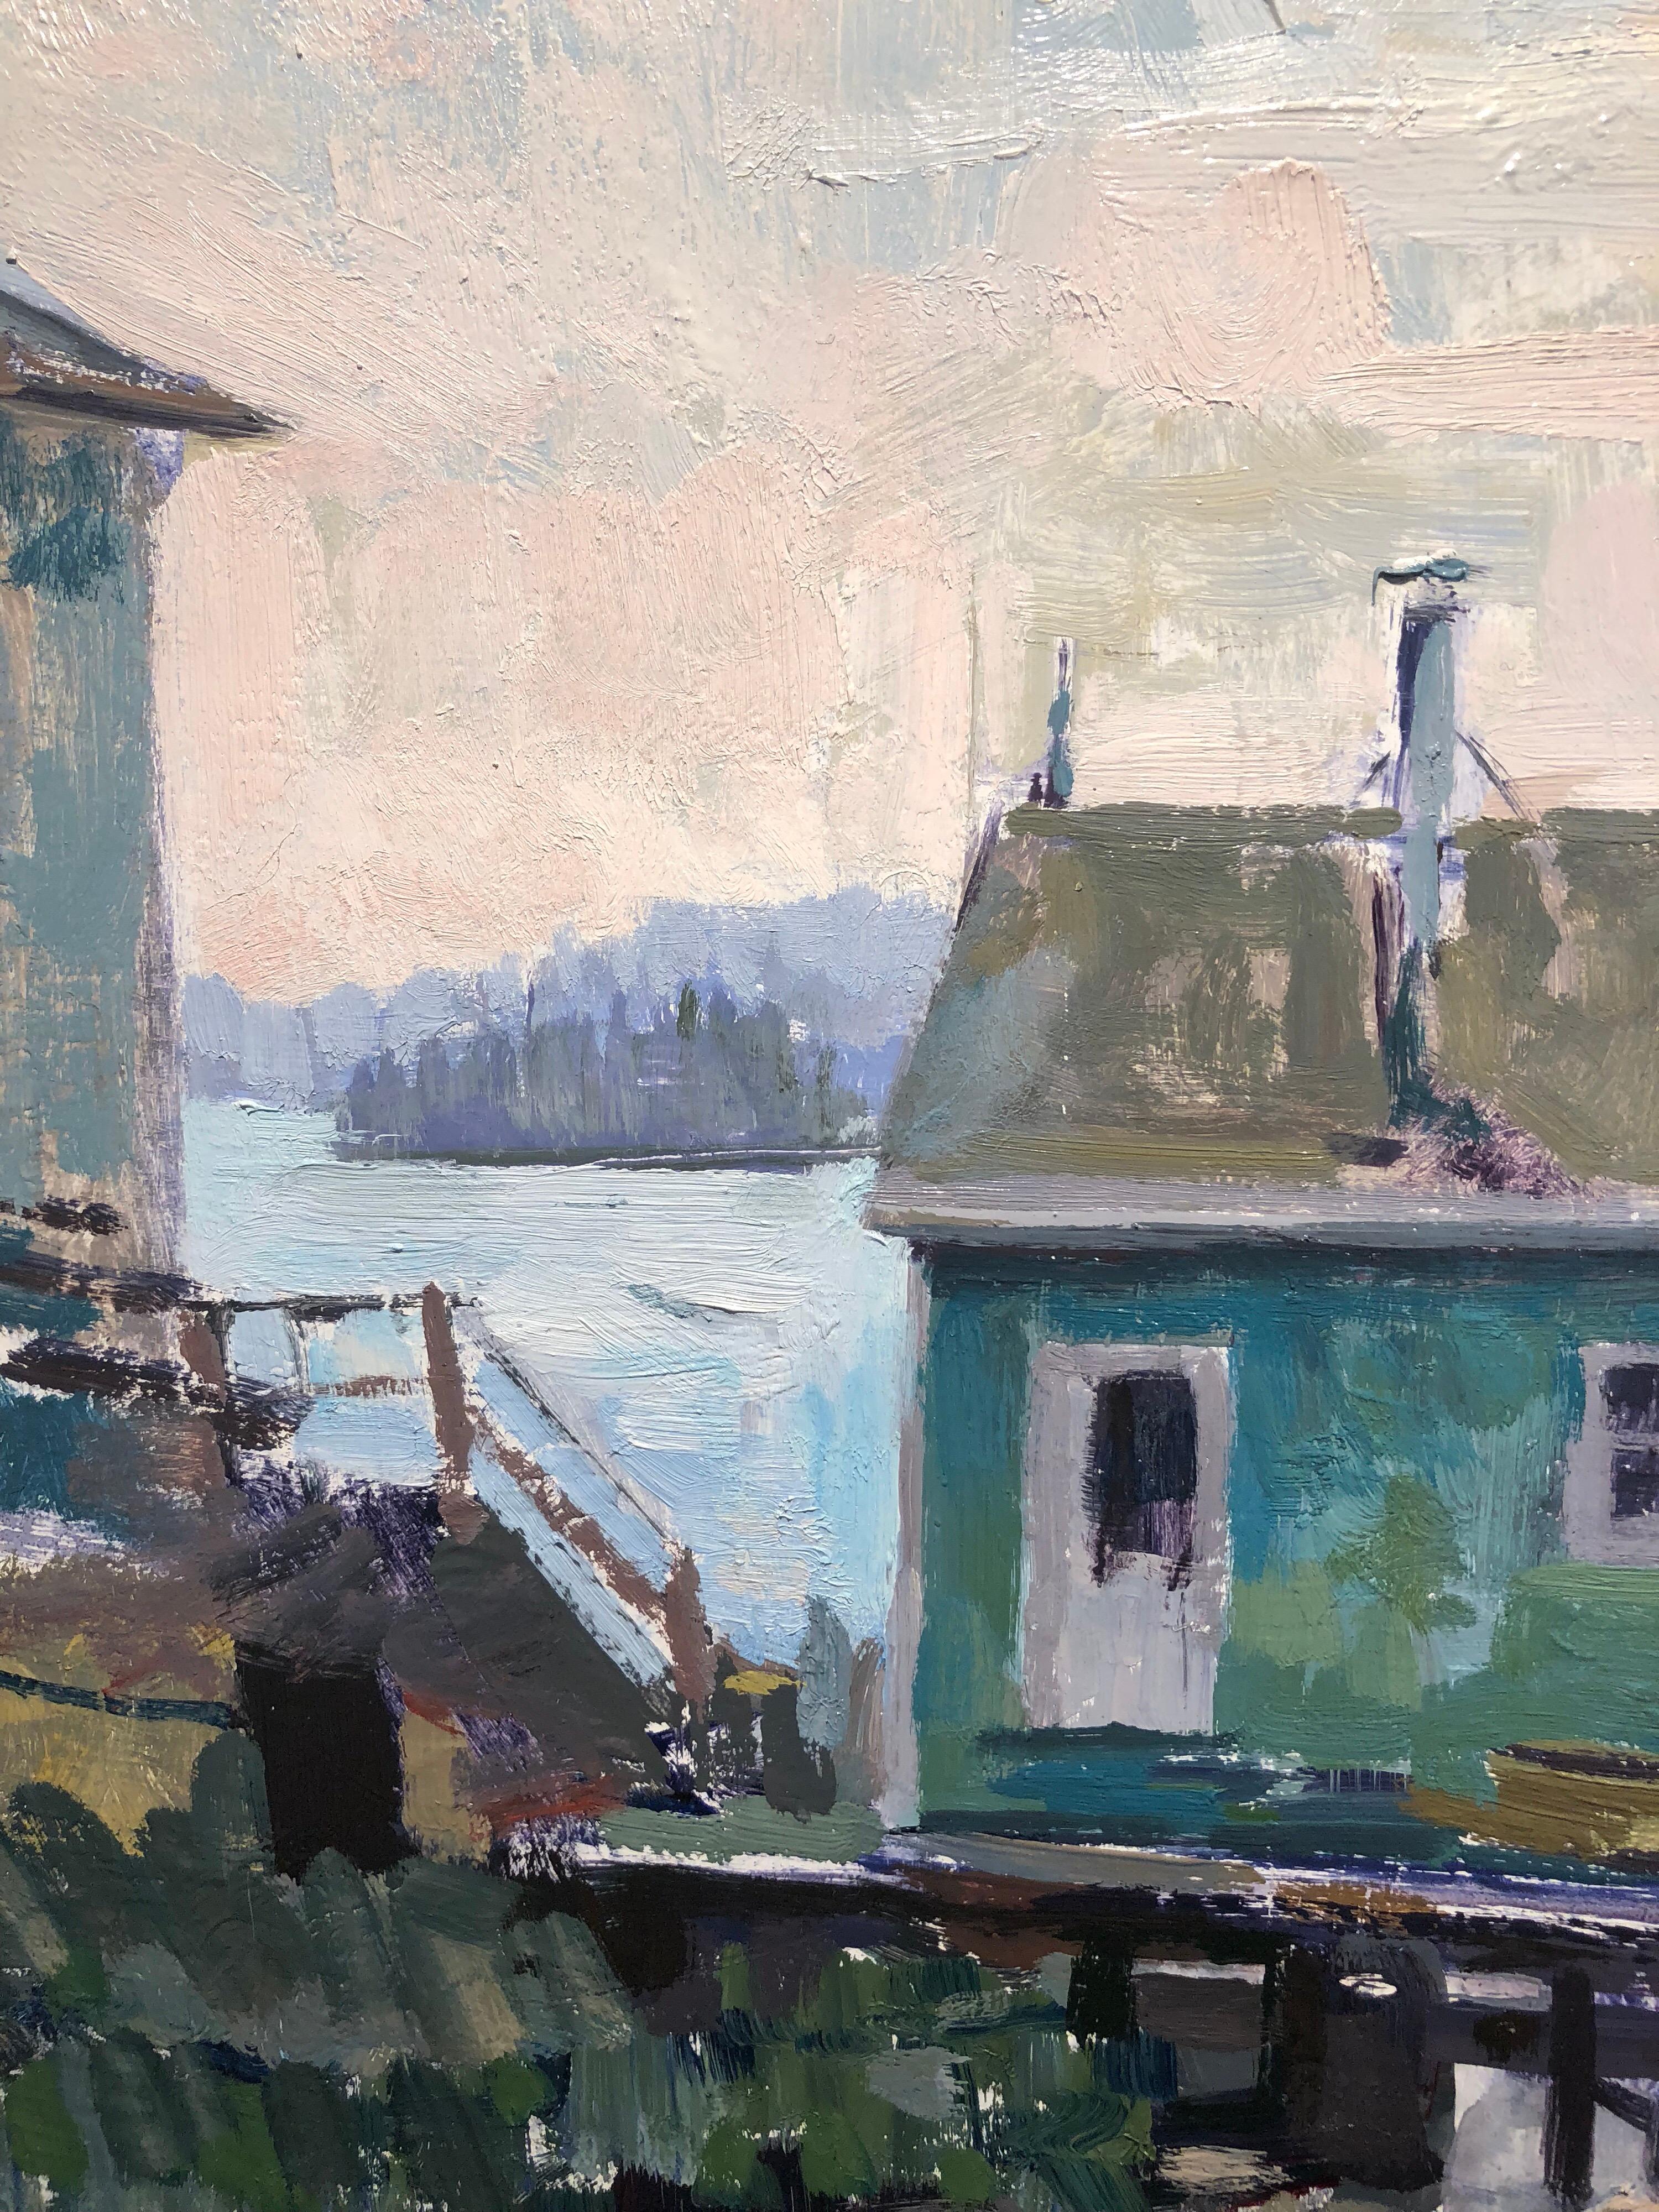 A quintessential New England scene of a lobster dock in the seaside town of Stonington, Maine. Bold brushstrokes, rich color and impasto make this a painting with infinite interest and depth.

Leo Mancini-Hresko is a prolific artist who creates